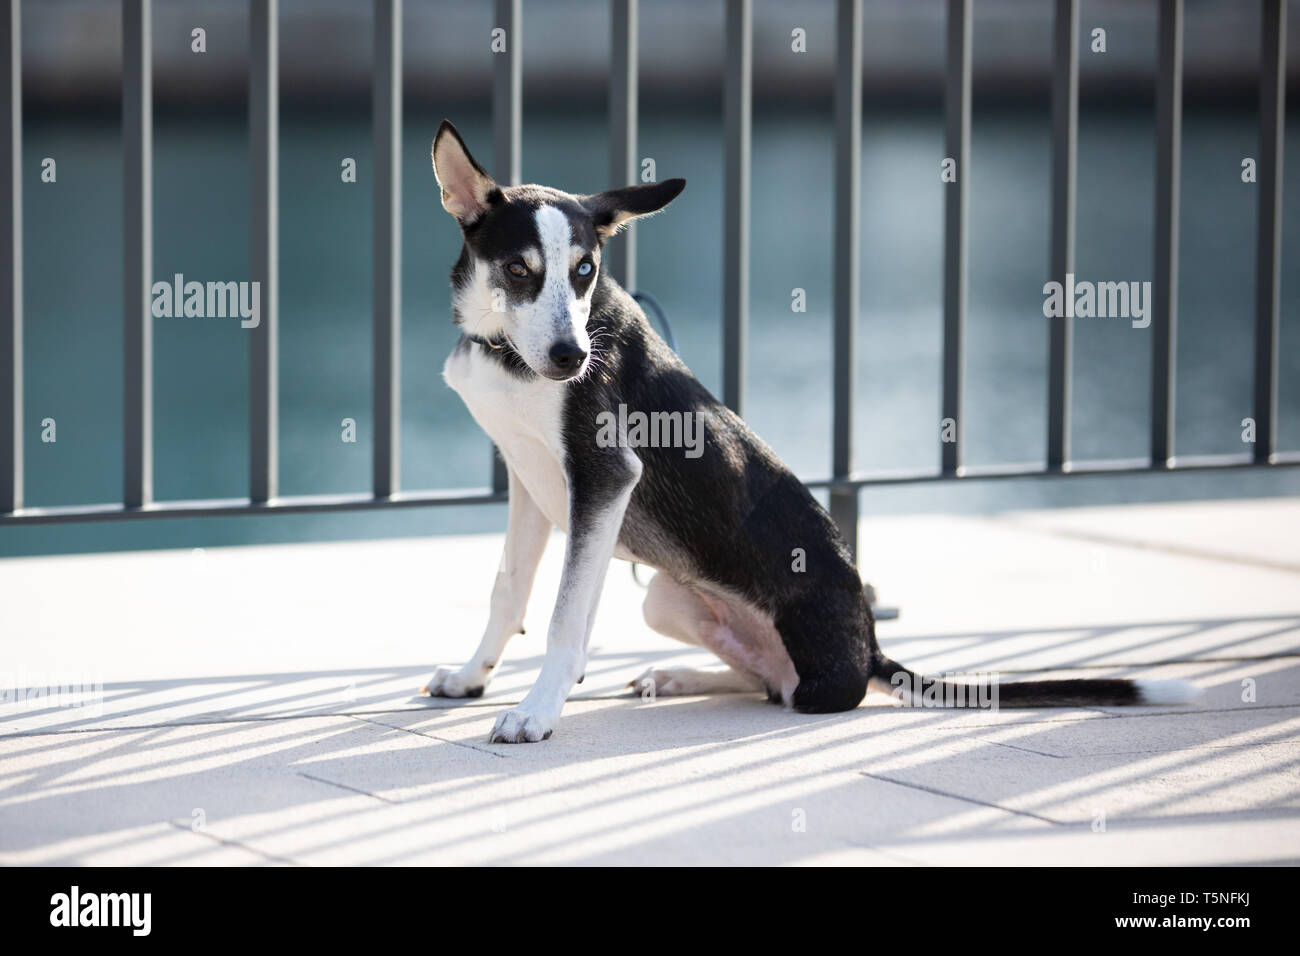 Three-legged husky mix breed puppy with heterochromia iridis (different colored eyes) tied to a fence on a river bank in urban setting. Dubai, UAE. Stock Photo